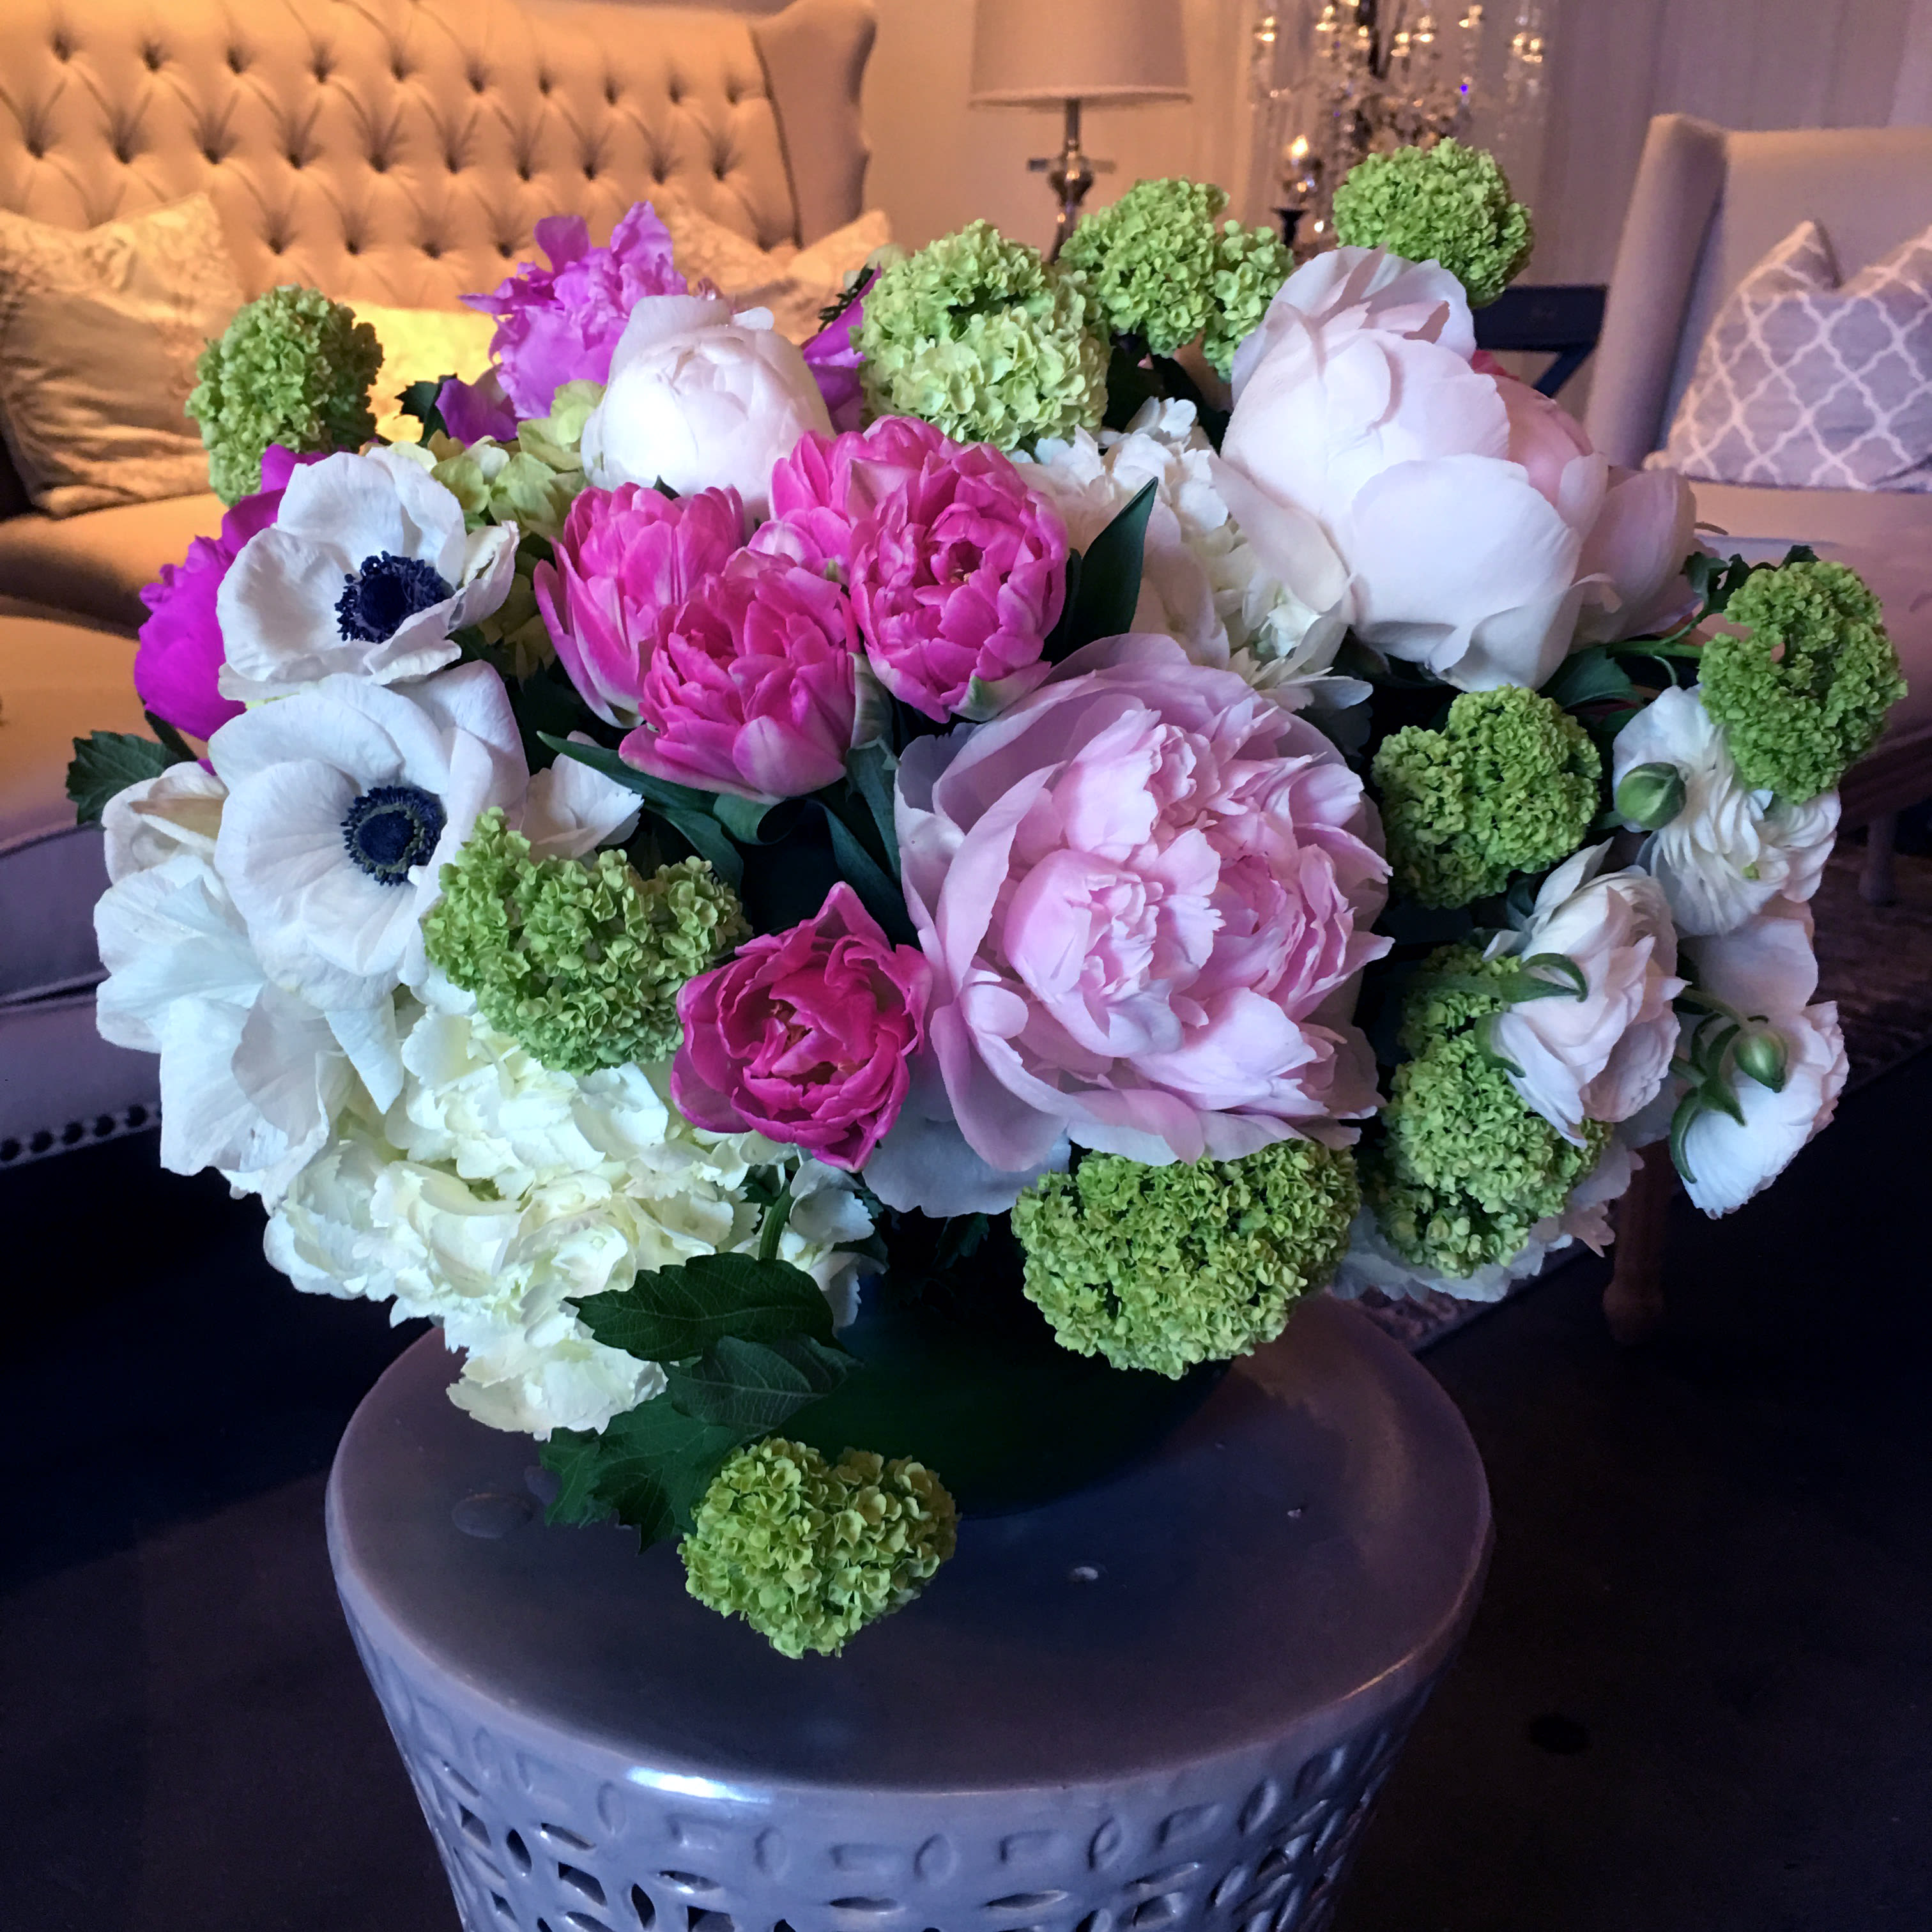 Peony Party - A traditional garden-style arrangement full of Spring's freshest and most beautiful flowers. White hydrangea, pink tulips, green viburnum, white anemones, and of course, pink peonies sit in a 10 inch leaf-lined fishbowl style glass vase. 